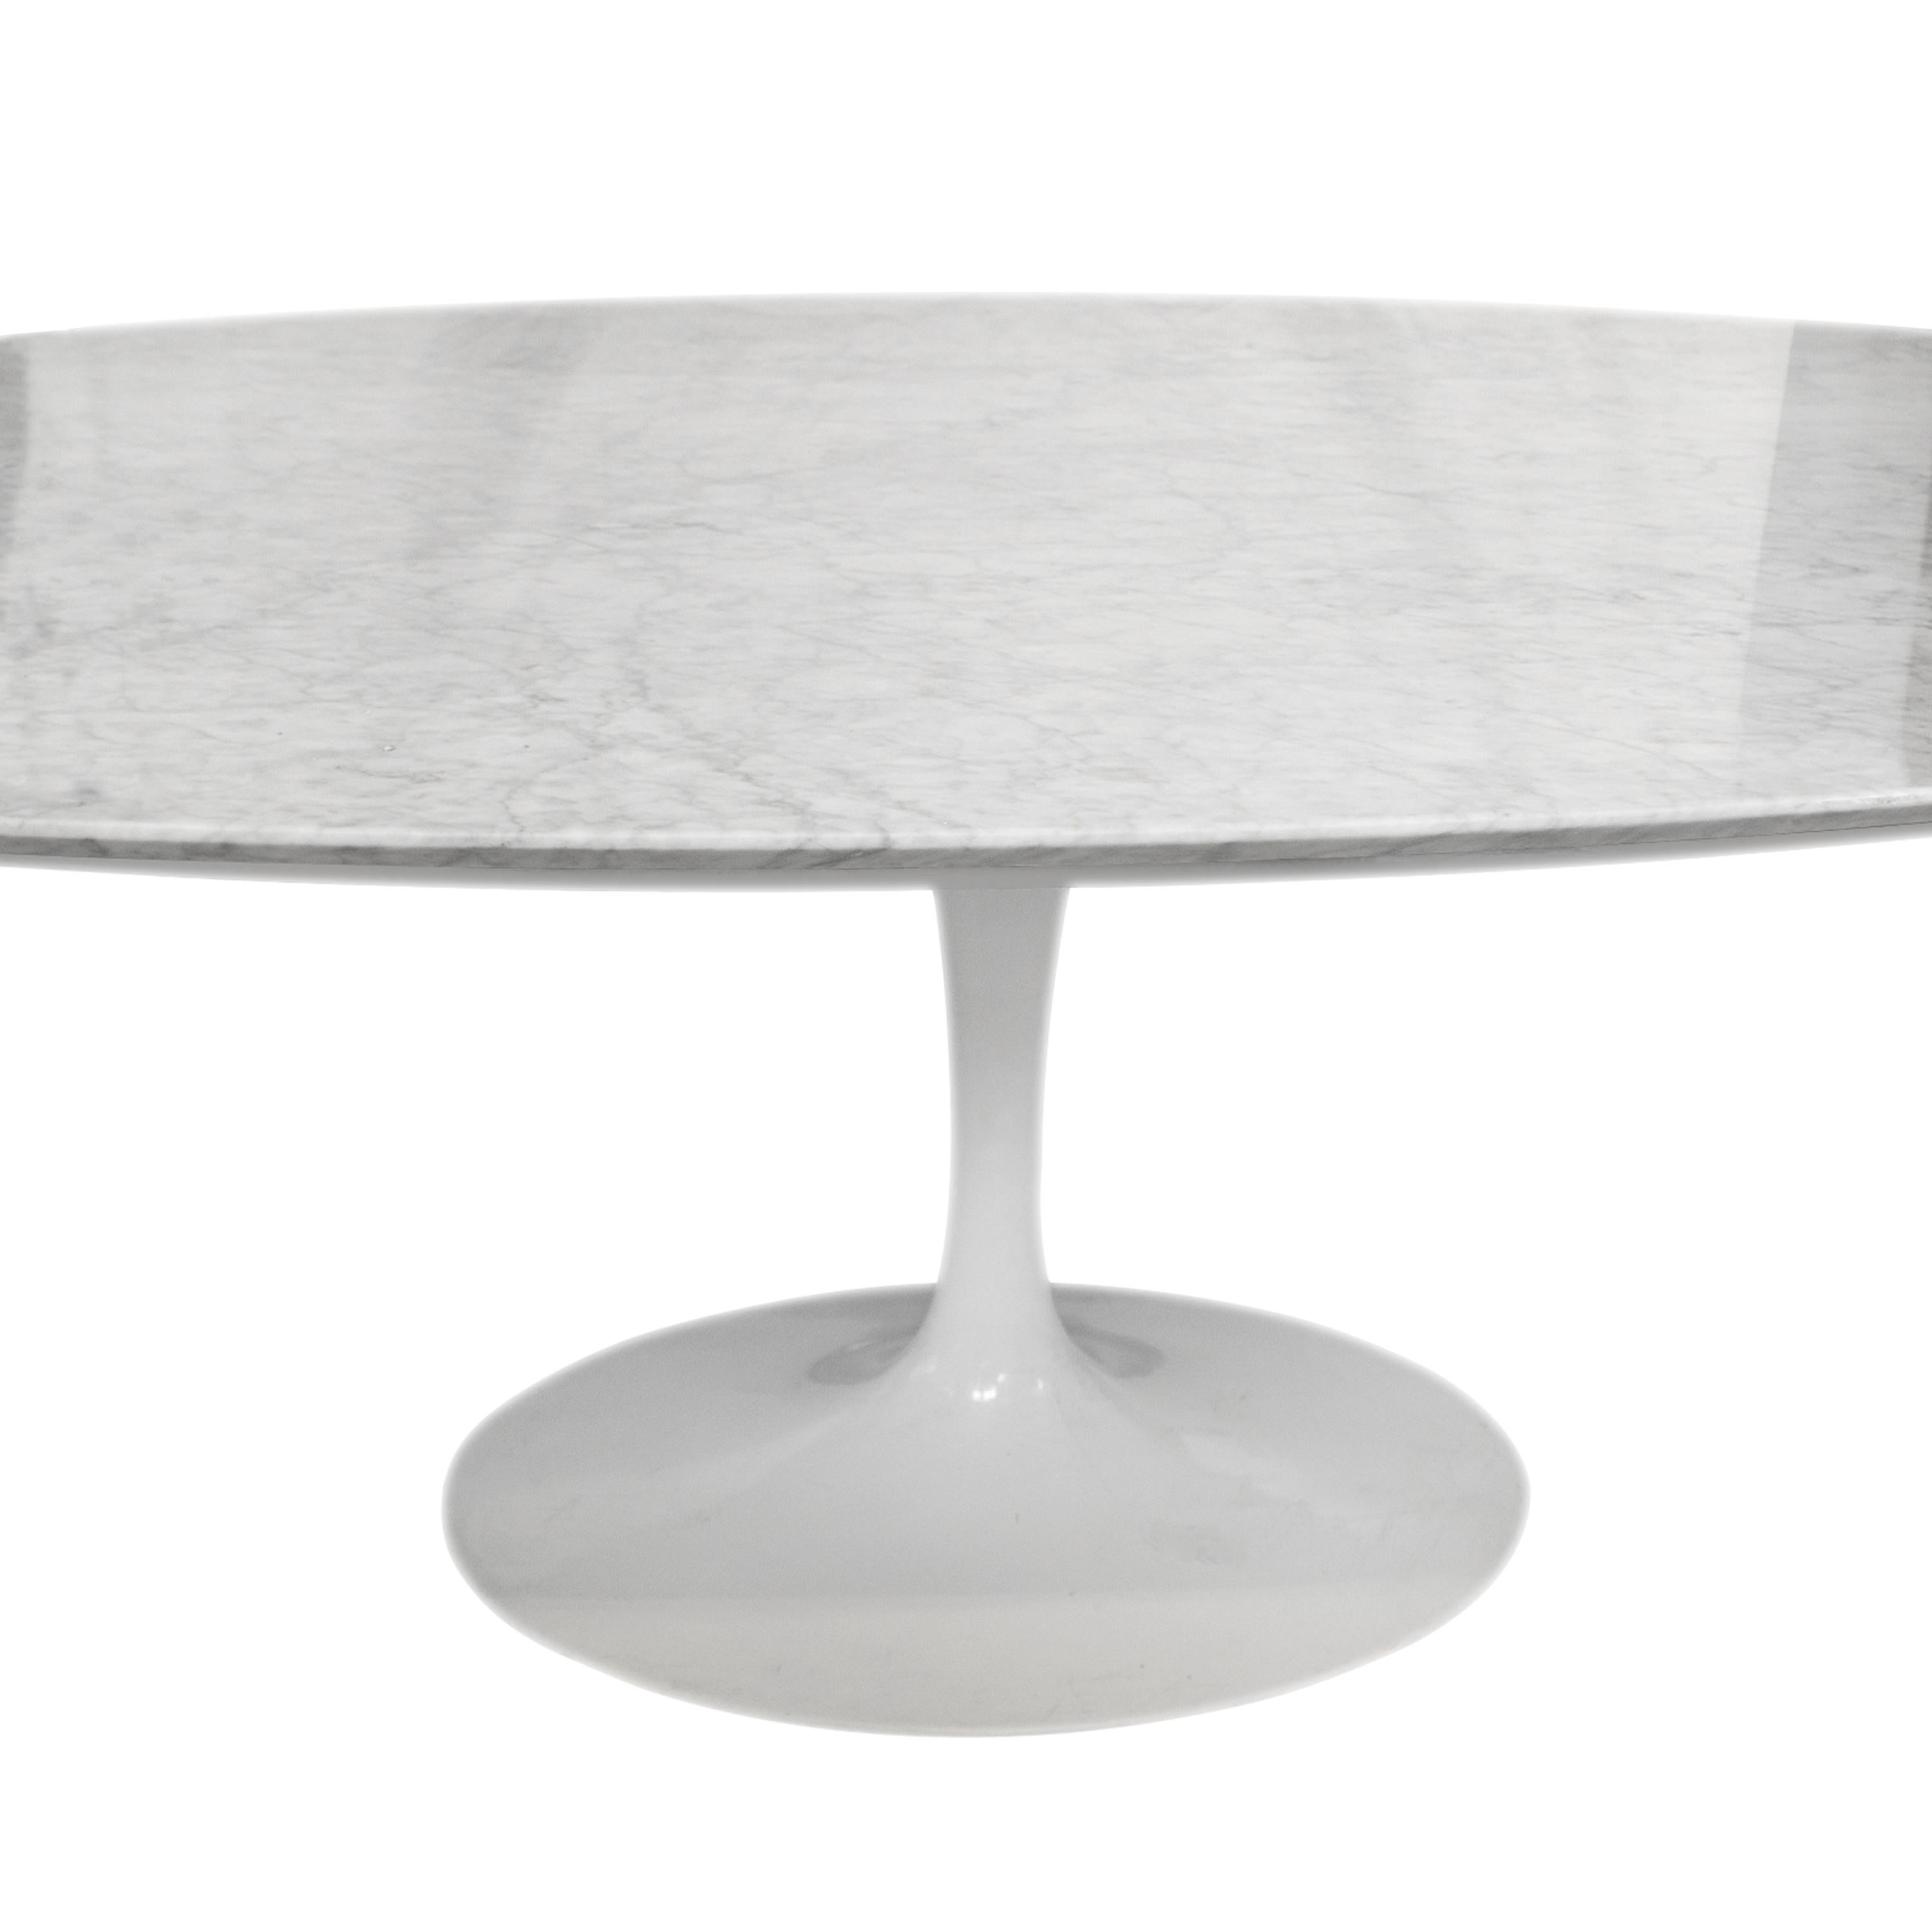 Tulip-style dining table, designed by Eero Saarinen, made of a white lacquered metal base, and an oval carrara marble tabletop.